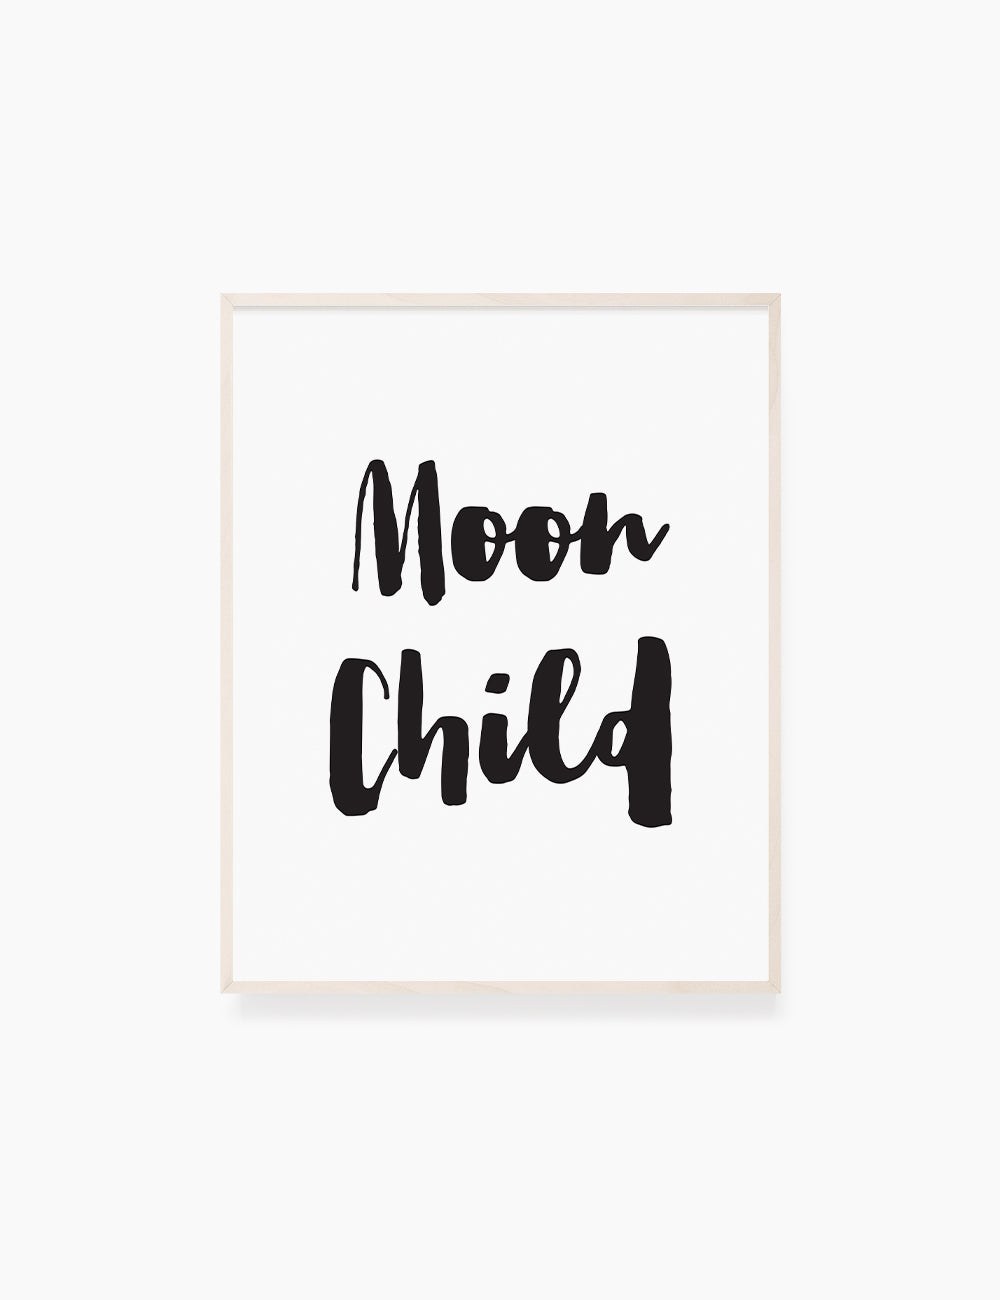 Printable Wall Art Quote: MOON CHILD. Printable Poster. Boho Quote. Astrology Quote. WA038 - Paper Moon Art & Design